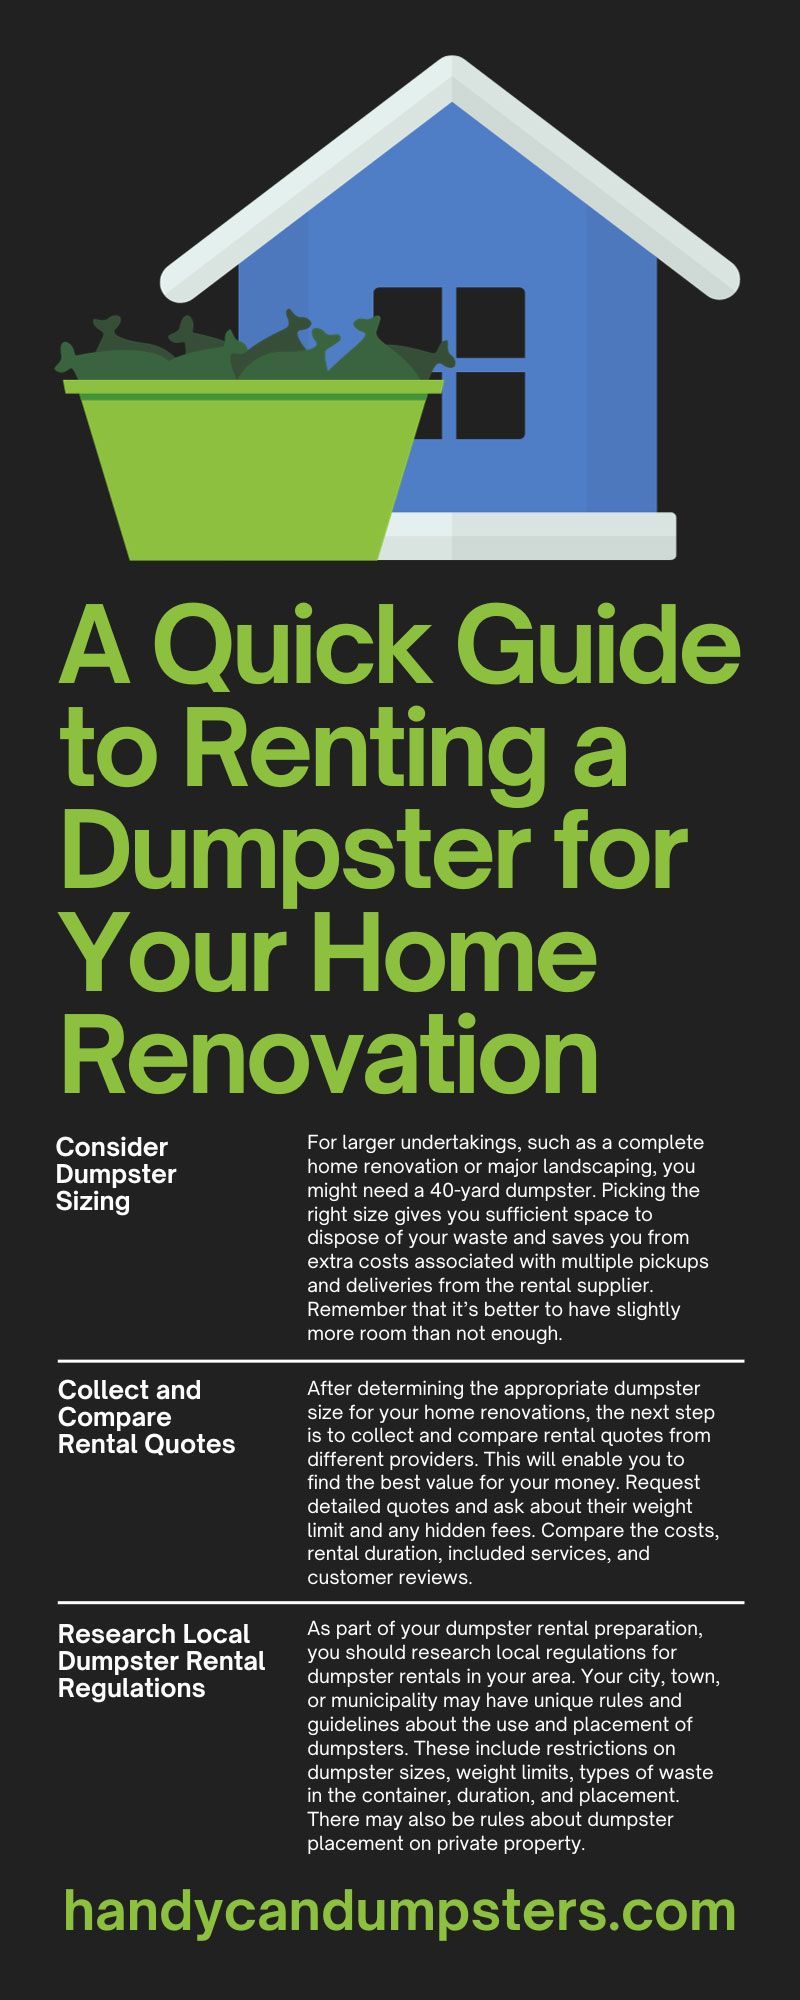 A Quick Guide to Renting a Dumpster for Your Home Renovation